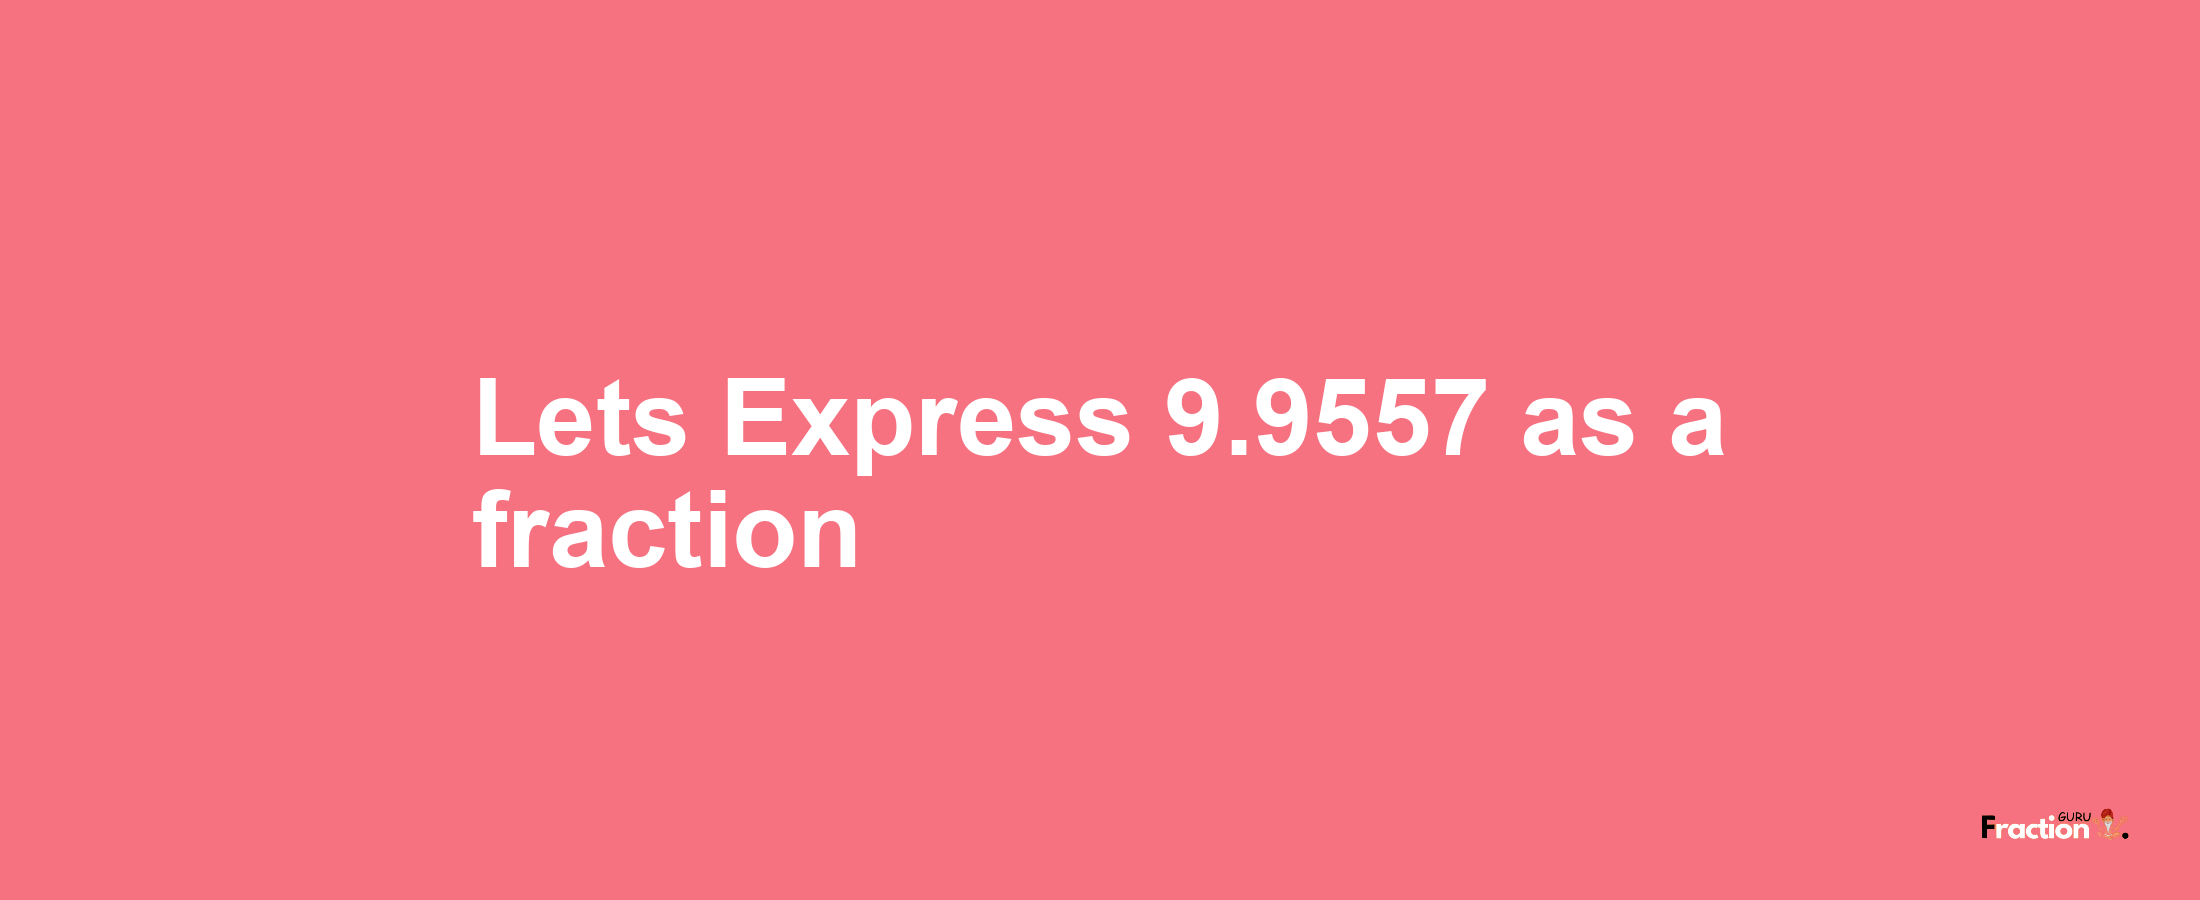 Lets Express 9.9557 as afraction